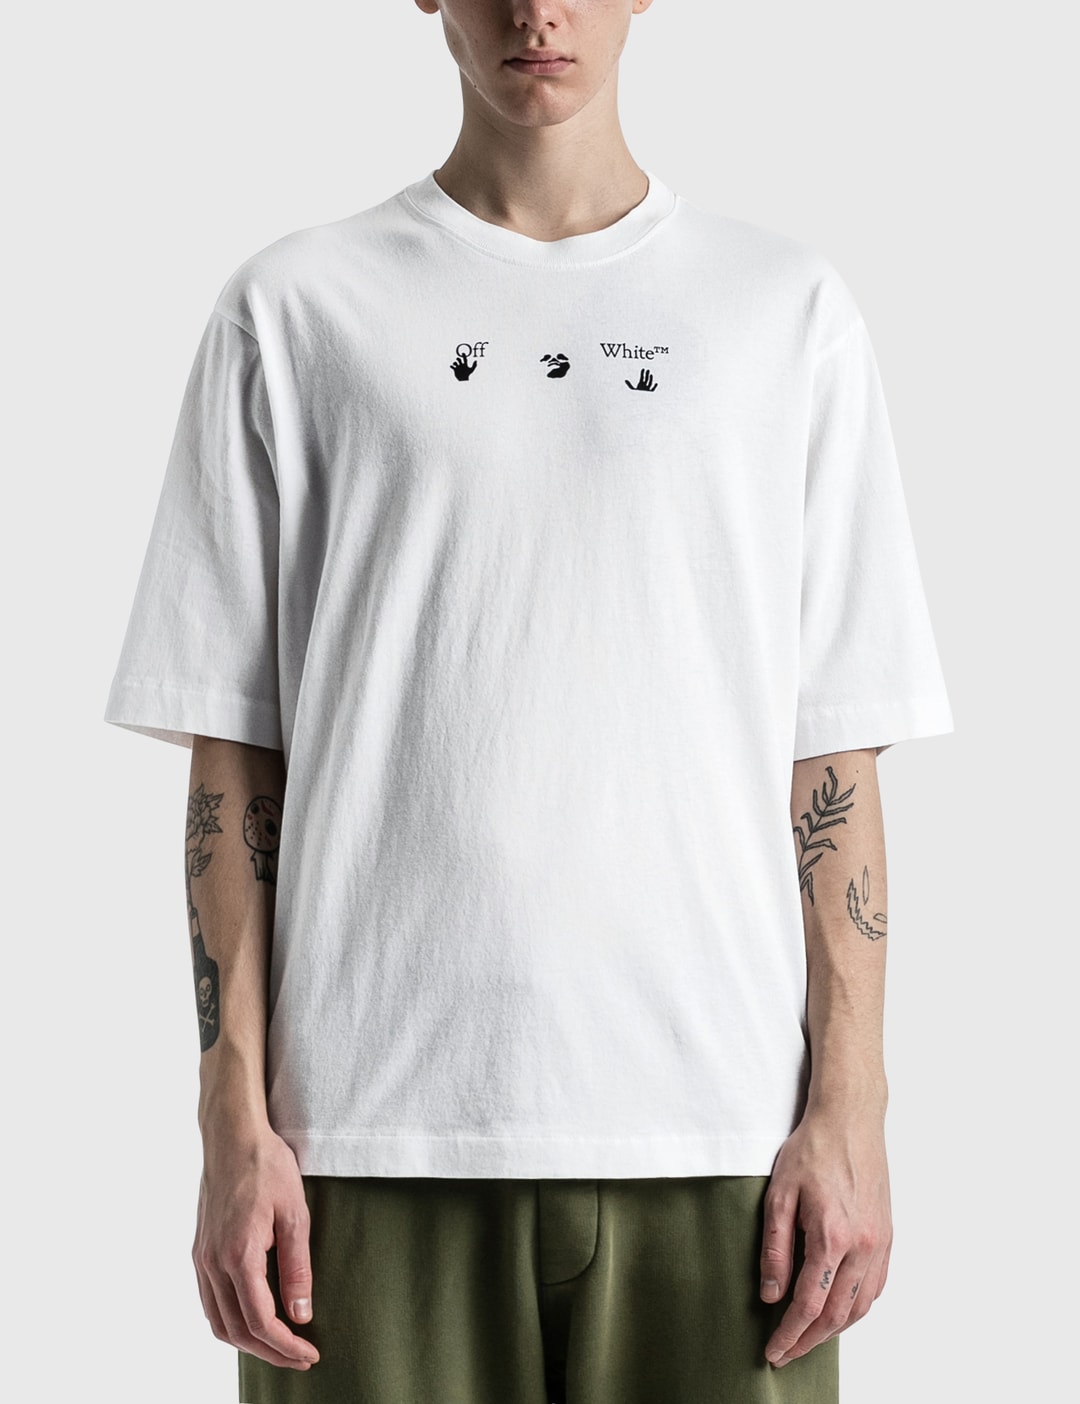 Magnetisk To grader Uforenelig Off-White - Paint Splat Arrow Skate T-shirt | HBX - Globally Curated  Fashion and Lifestyle by Hypebeast